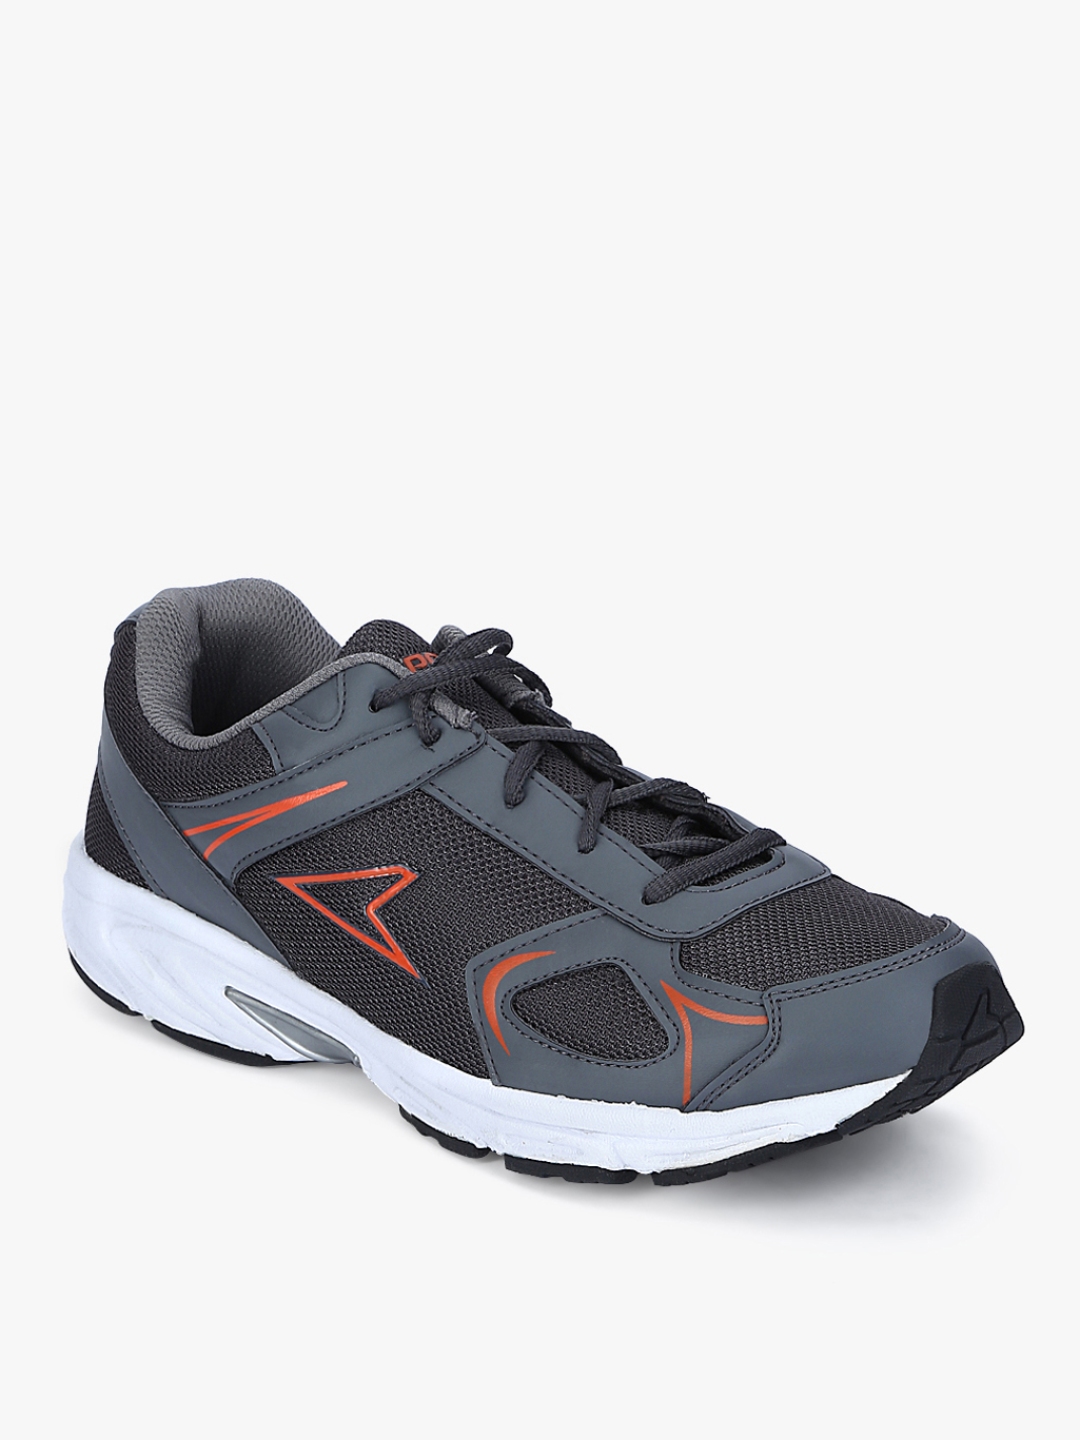 Buy Grey Running Shoes - Sports Shoes for Men 7924145 | Myntra